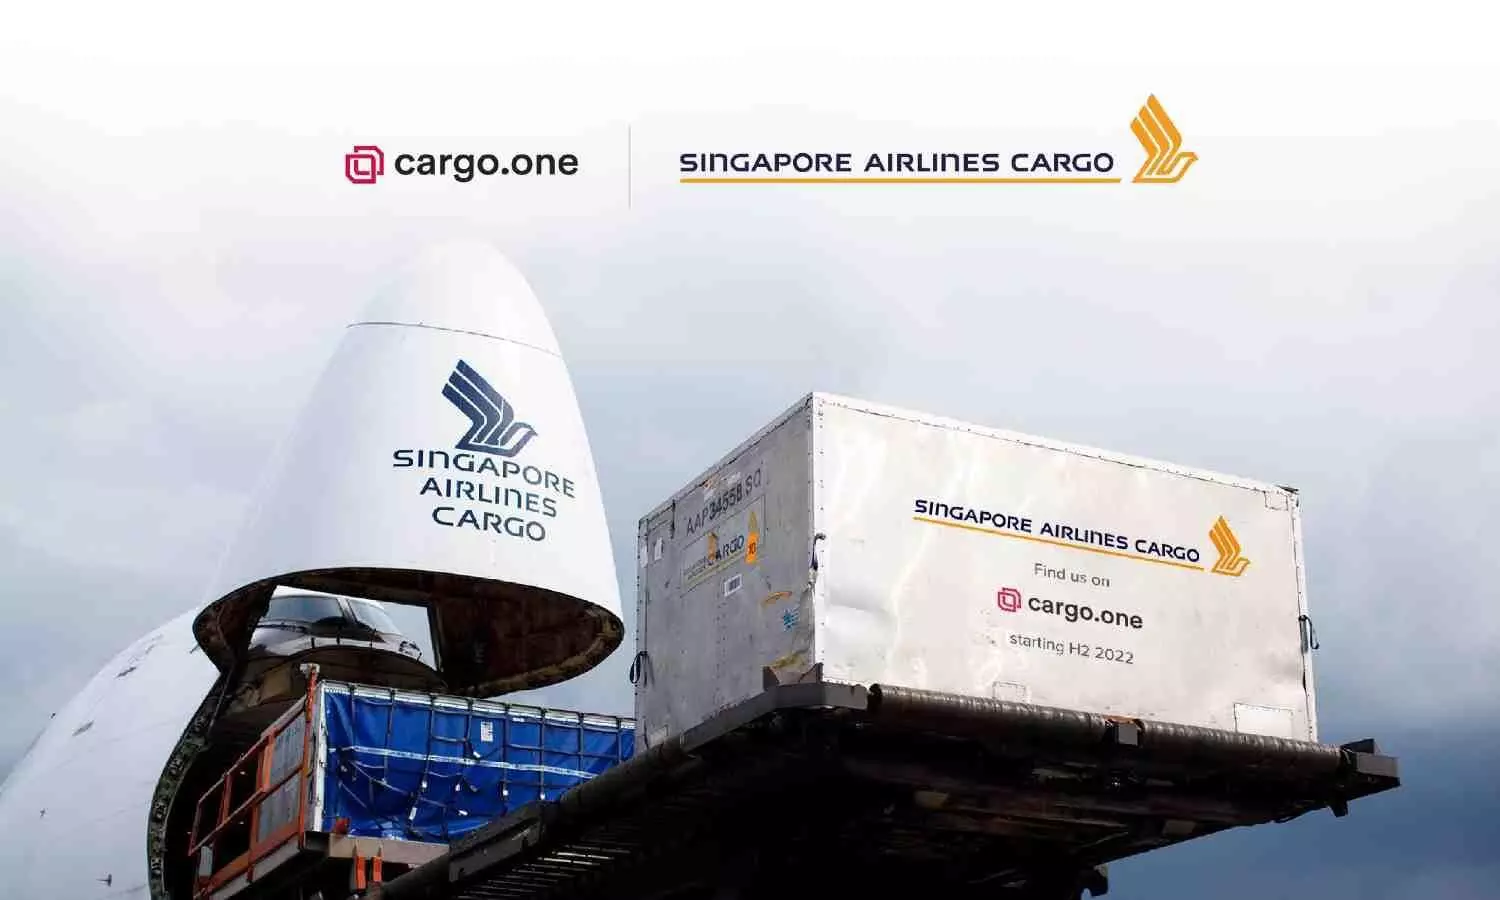 Singapore Airlines Cargo chooses cargo.one as global innovation partner